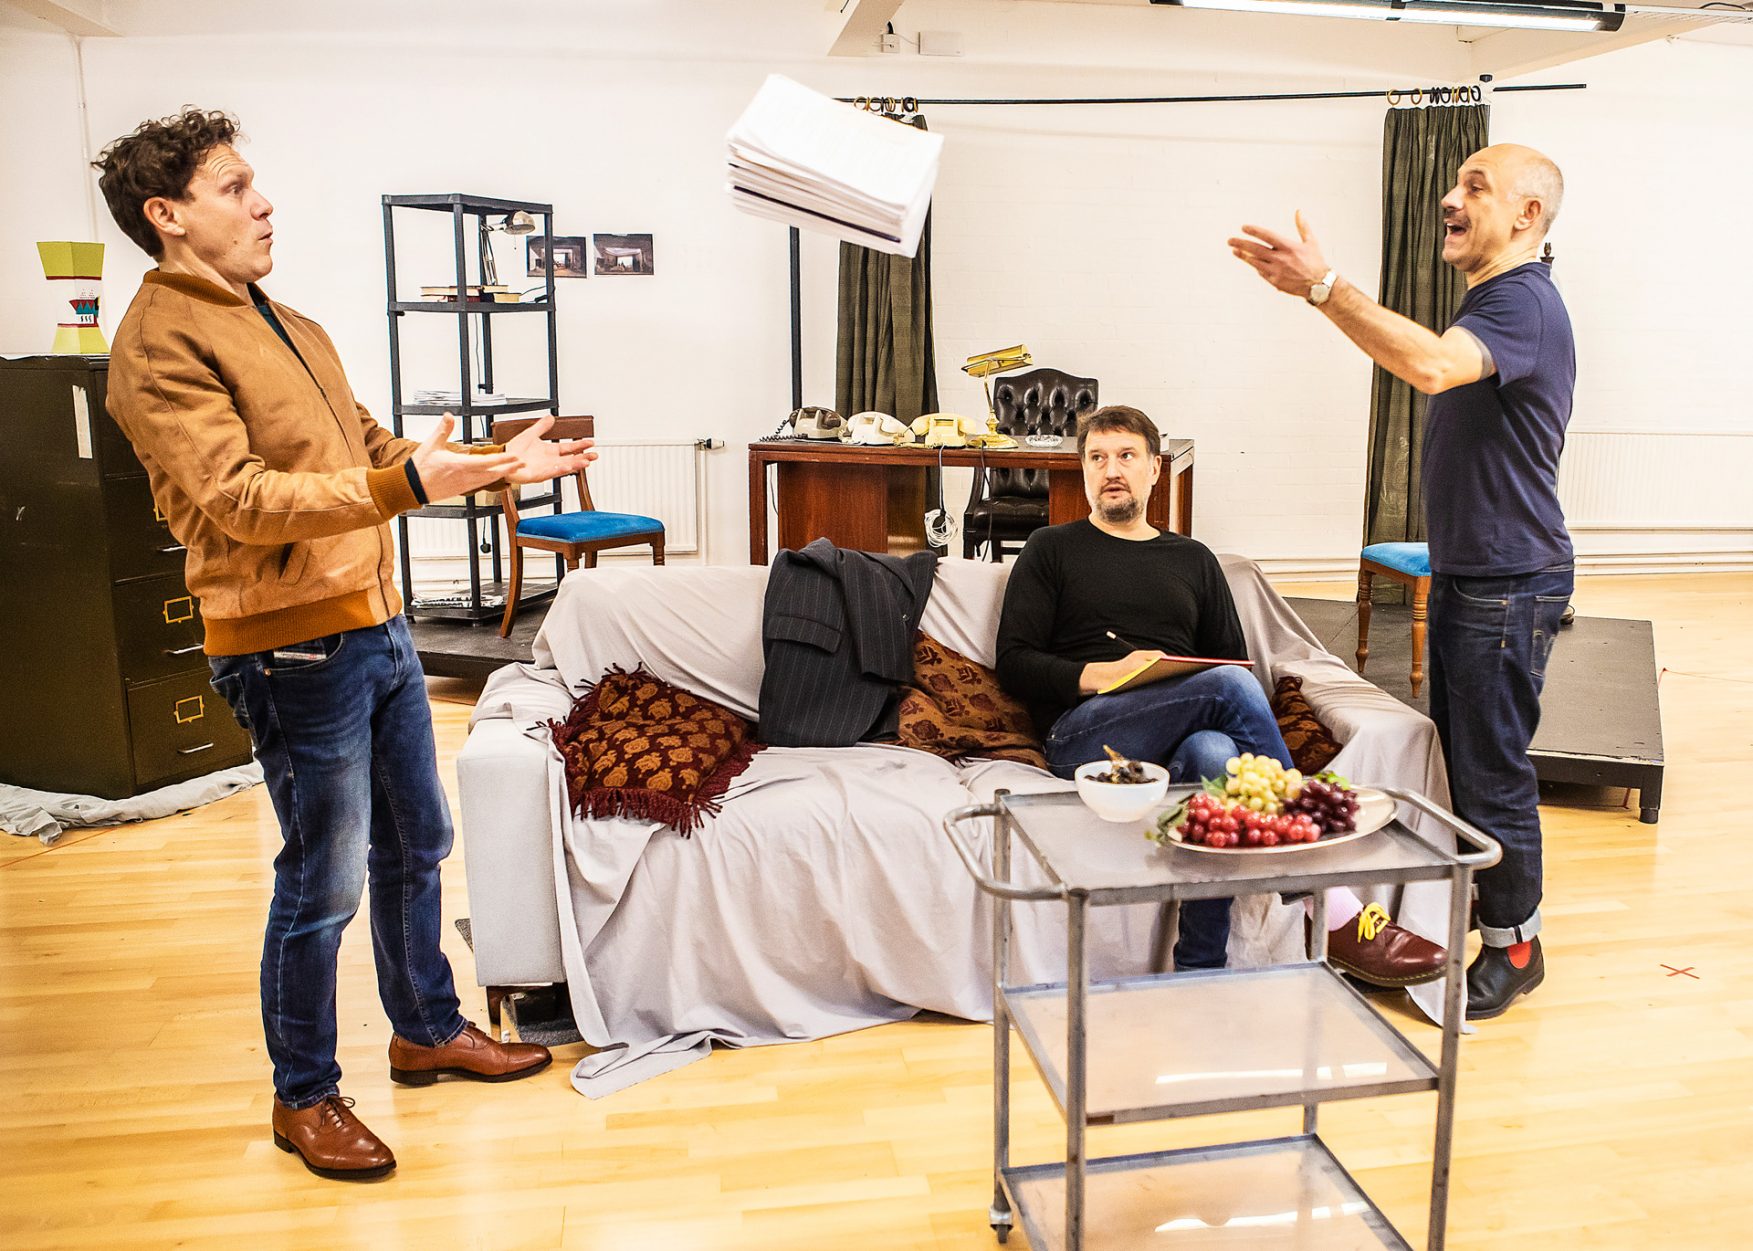 Moonlight and Magnolias in Rehearsal, photography by Pamela Raith